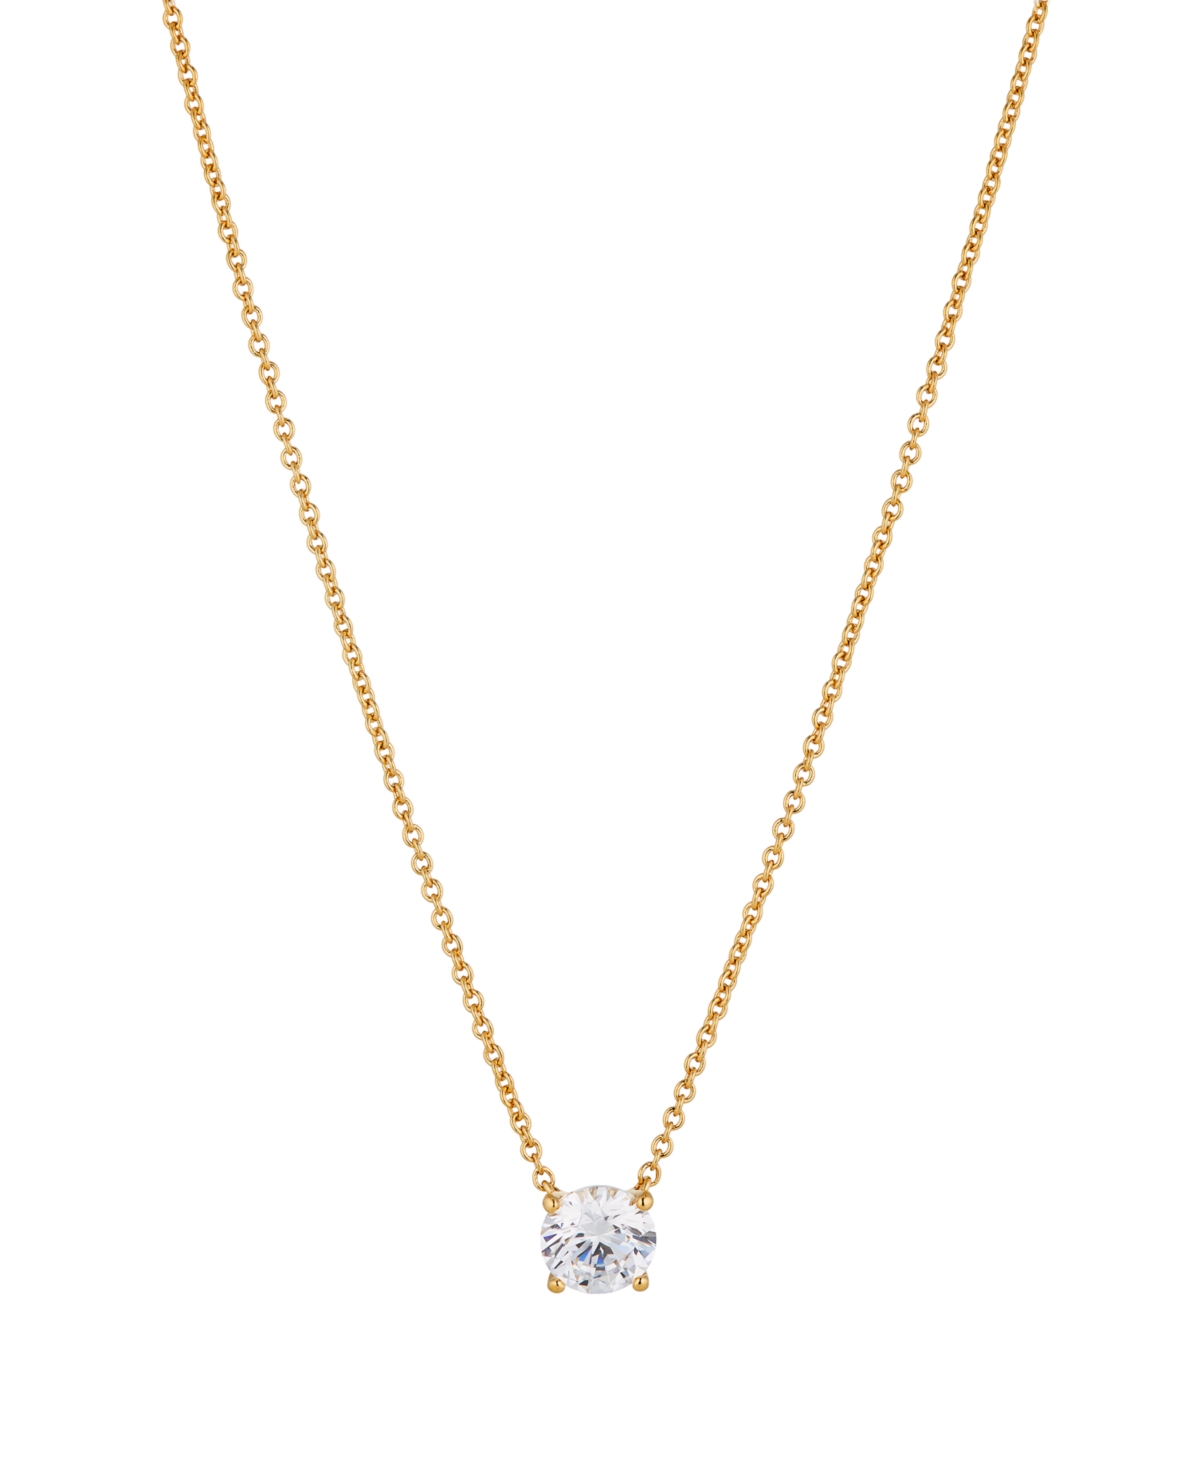 Eliot Danori 18k Gold Plated Large Necklace, Created For Macy's In Gold-plated